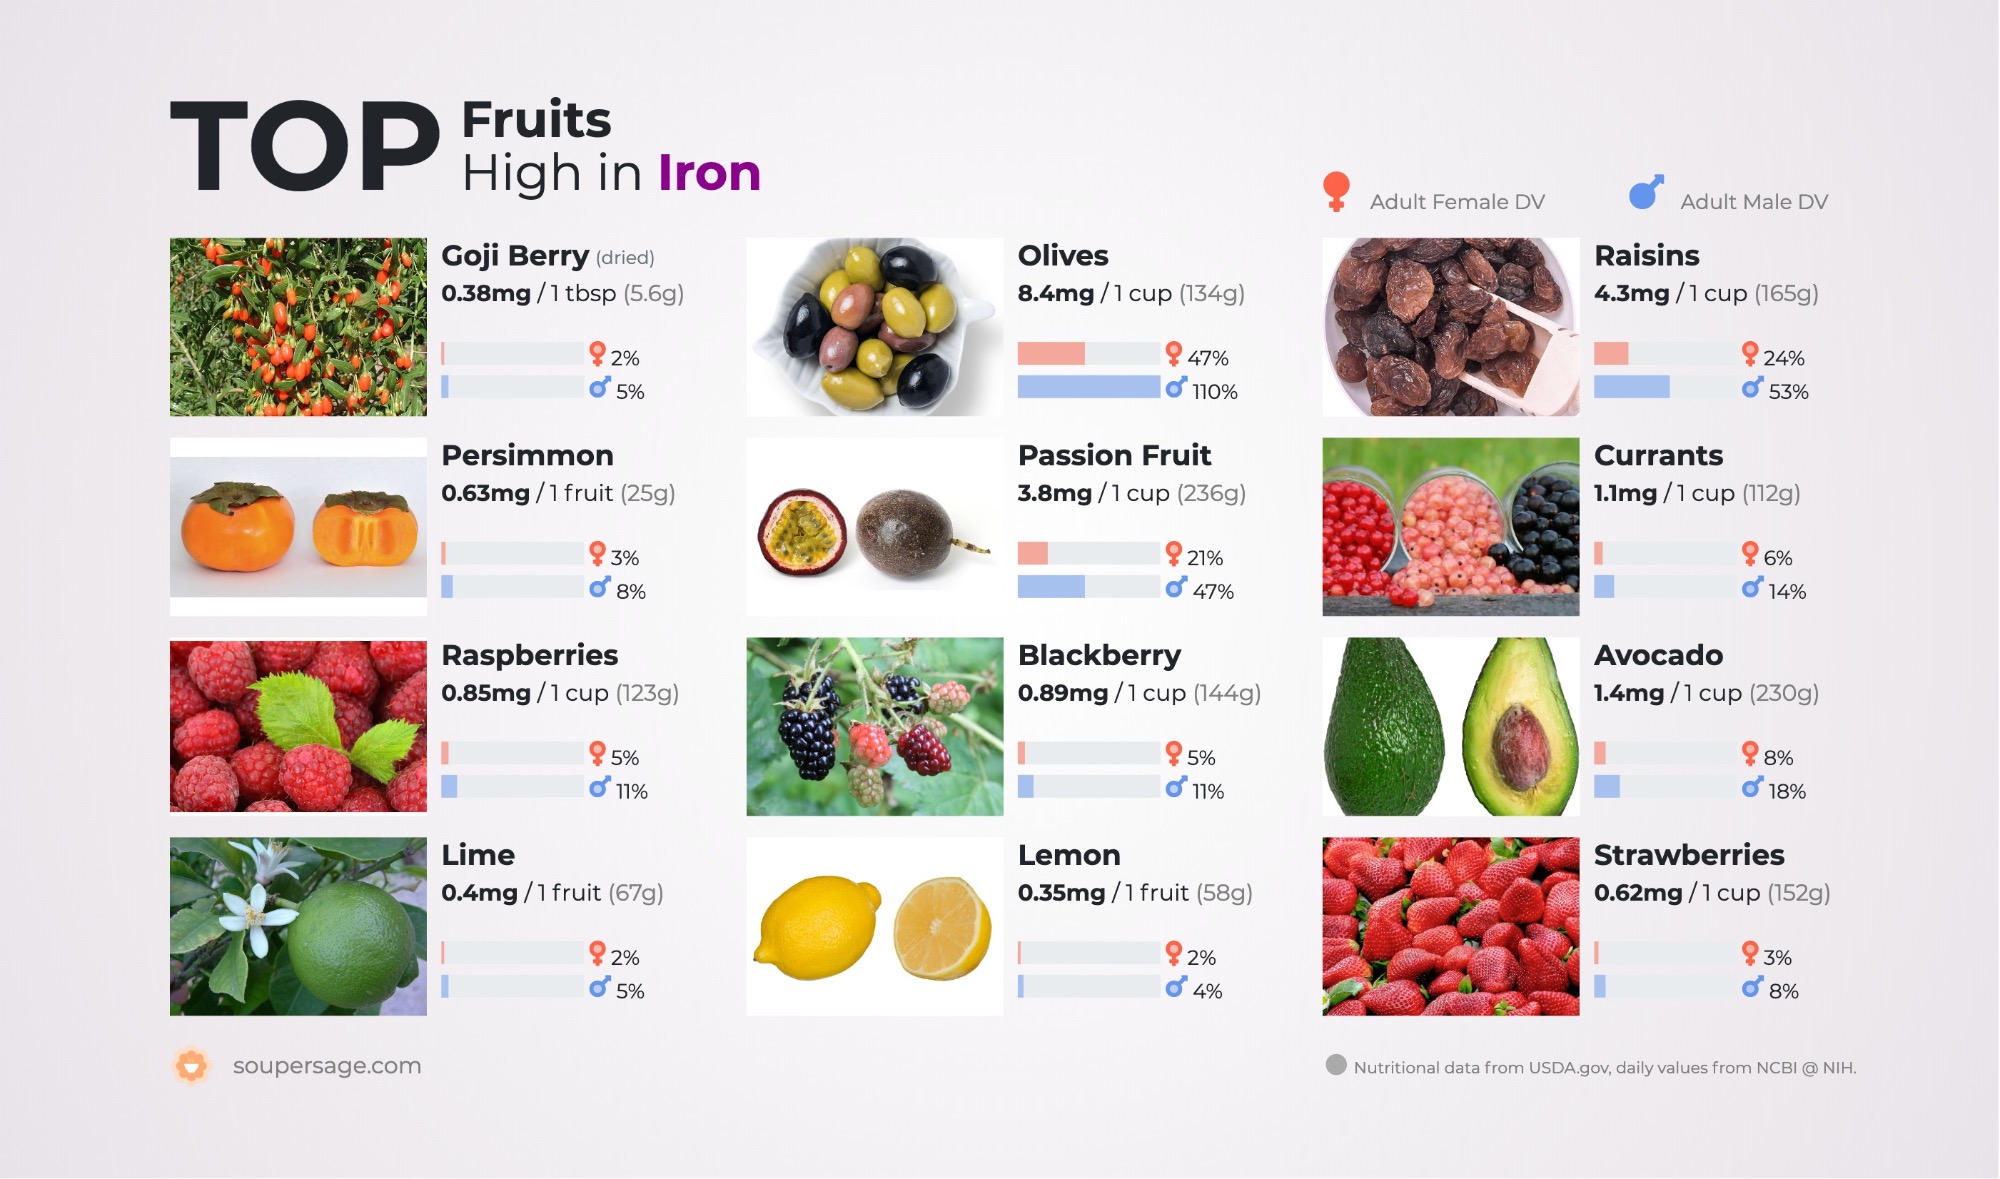 list of foods high in iron